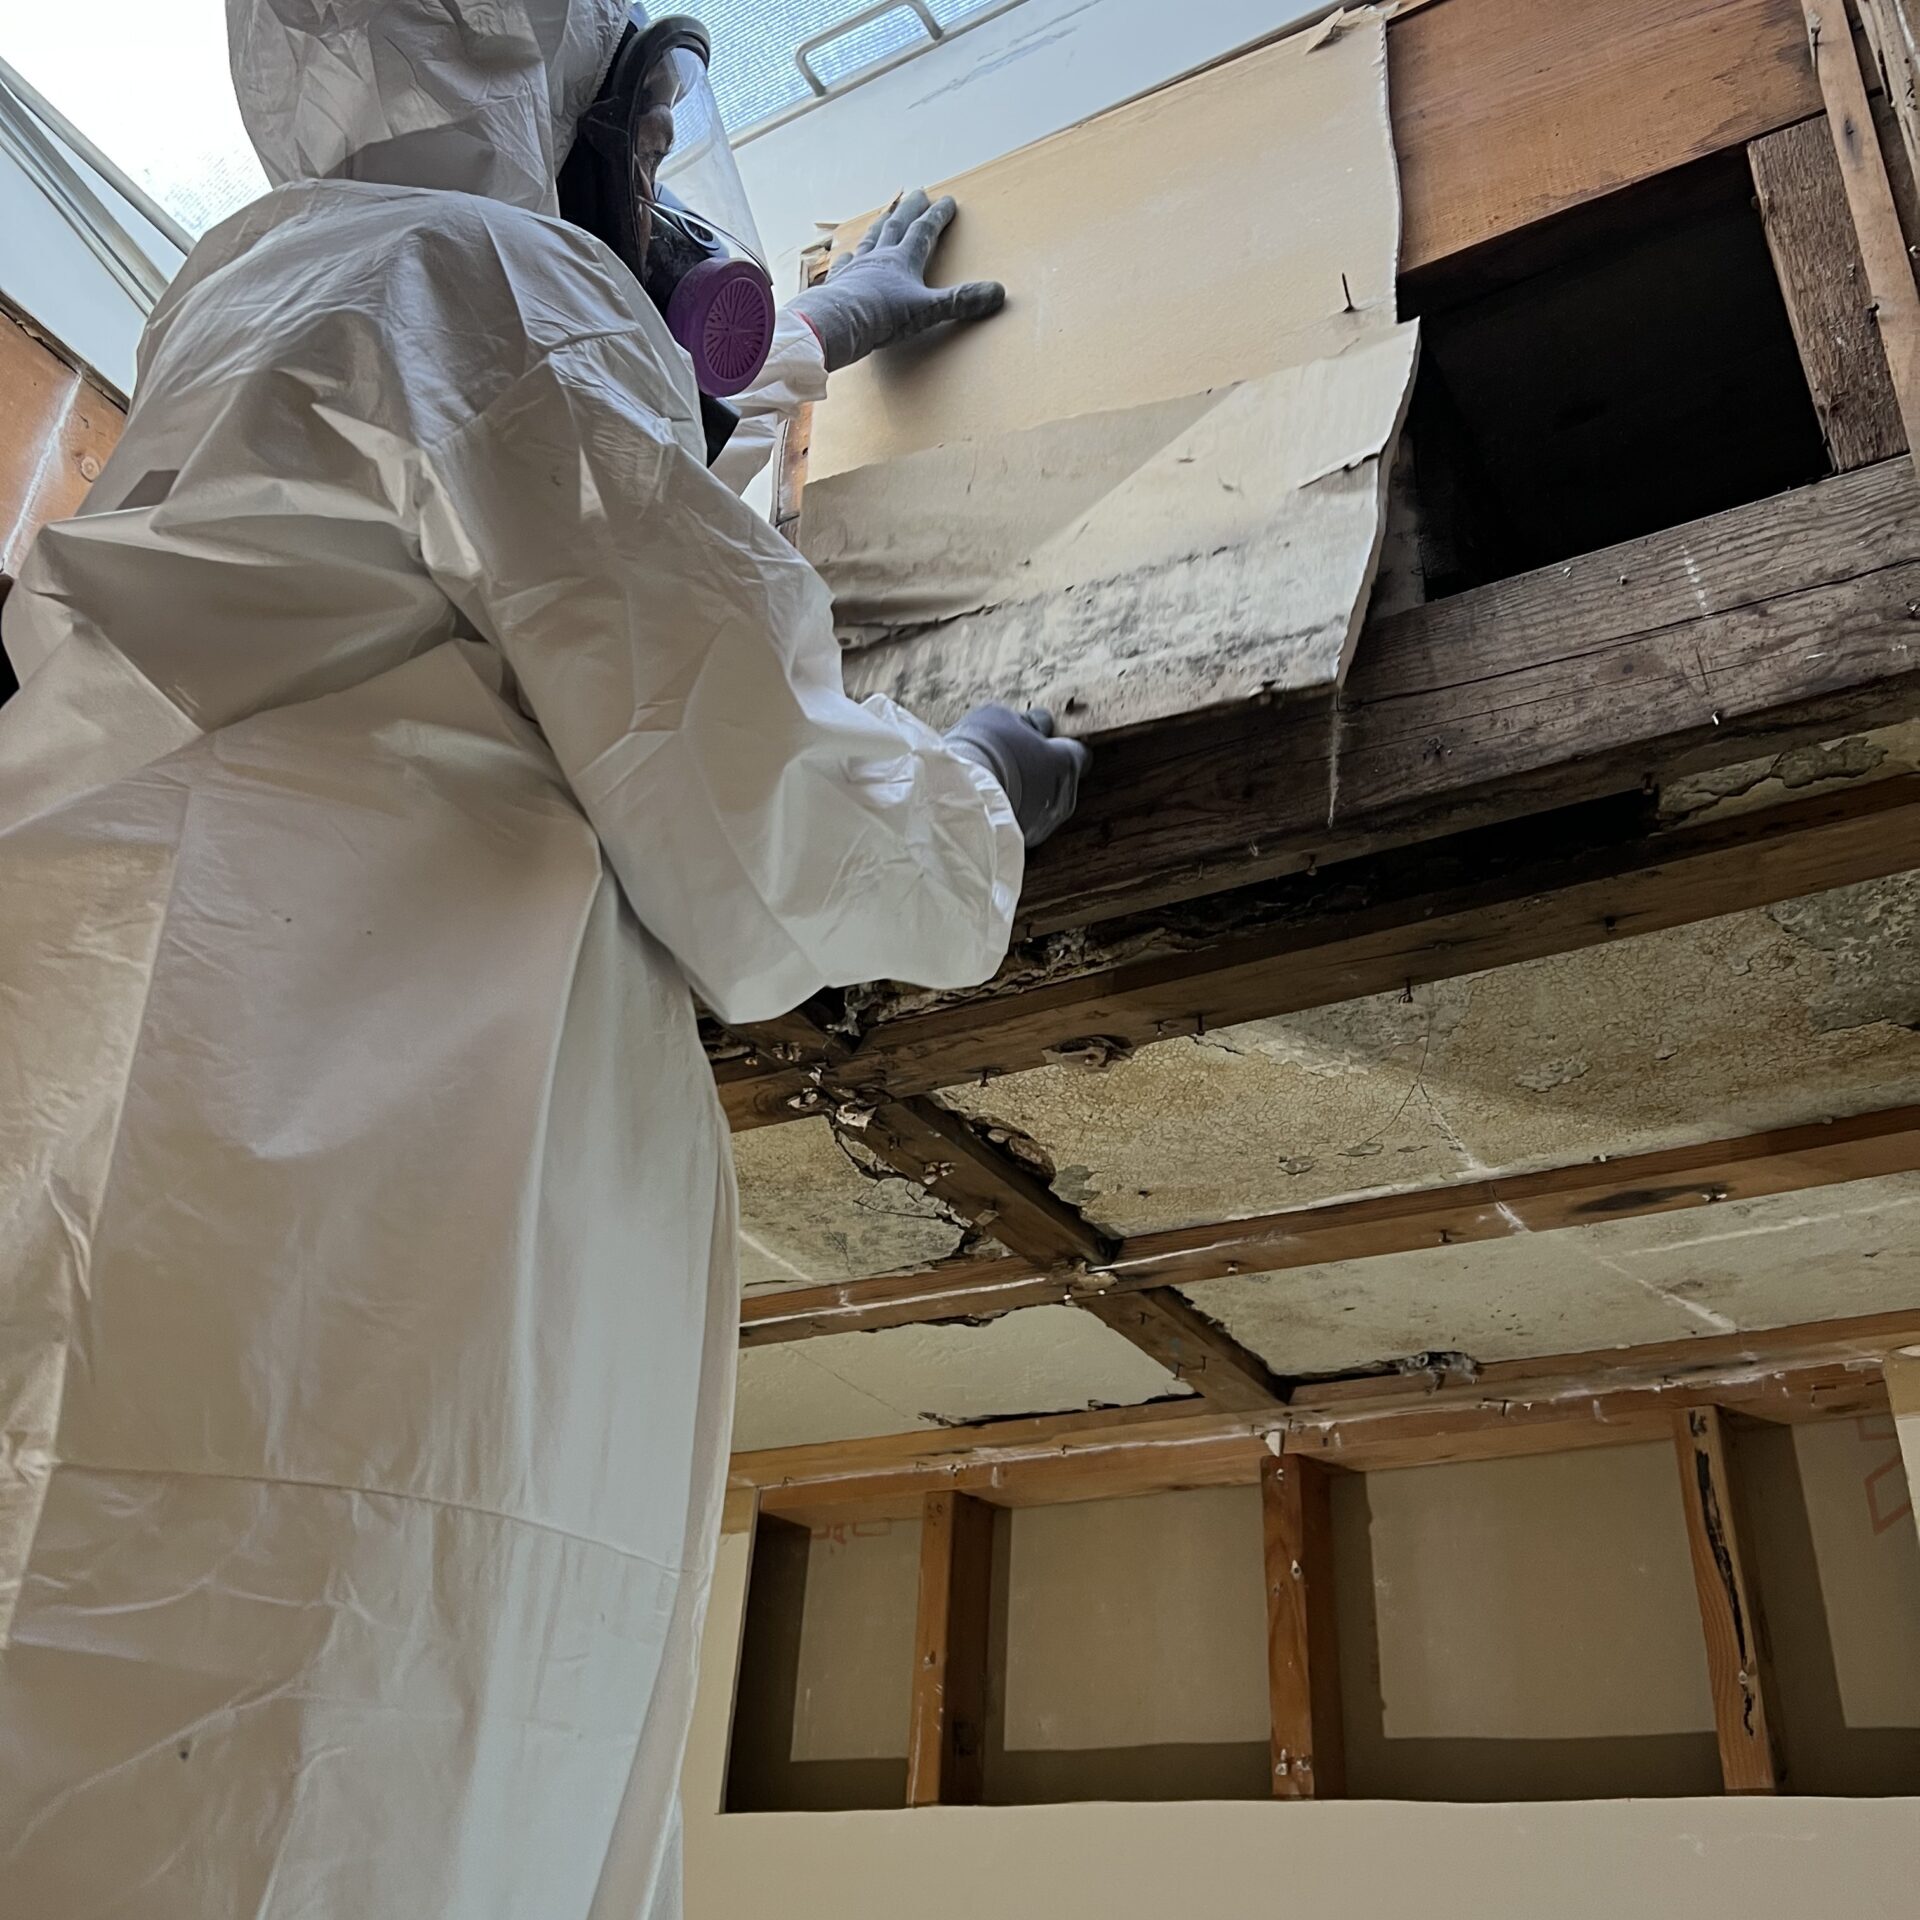 Professional in protective gear inspective ceiling mold damage